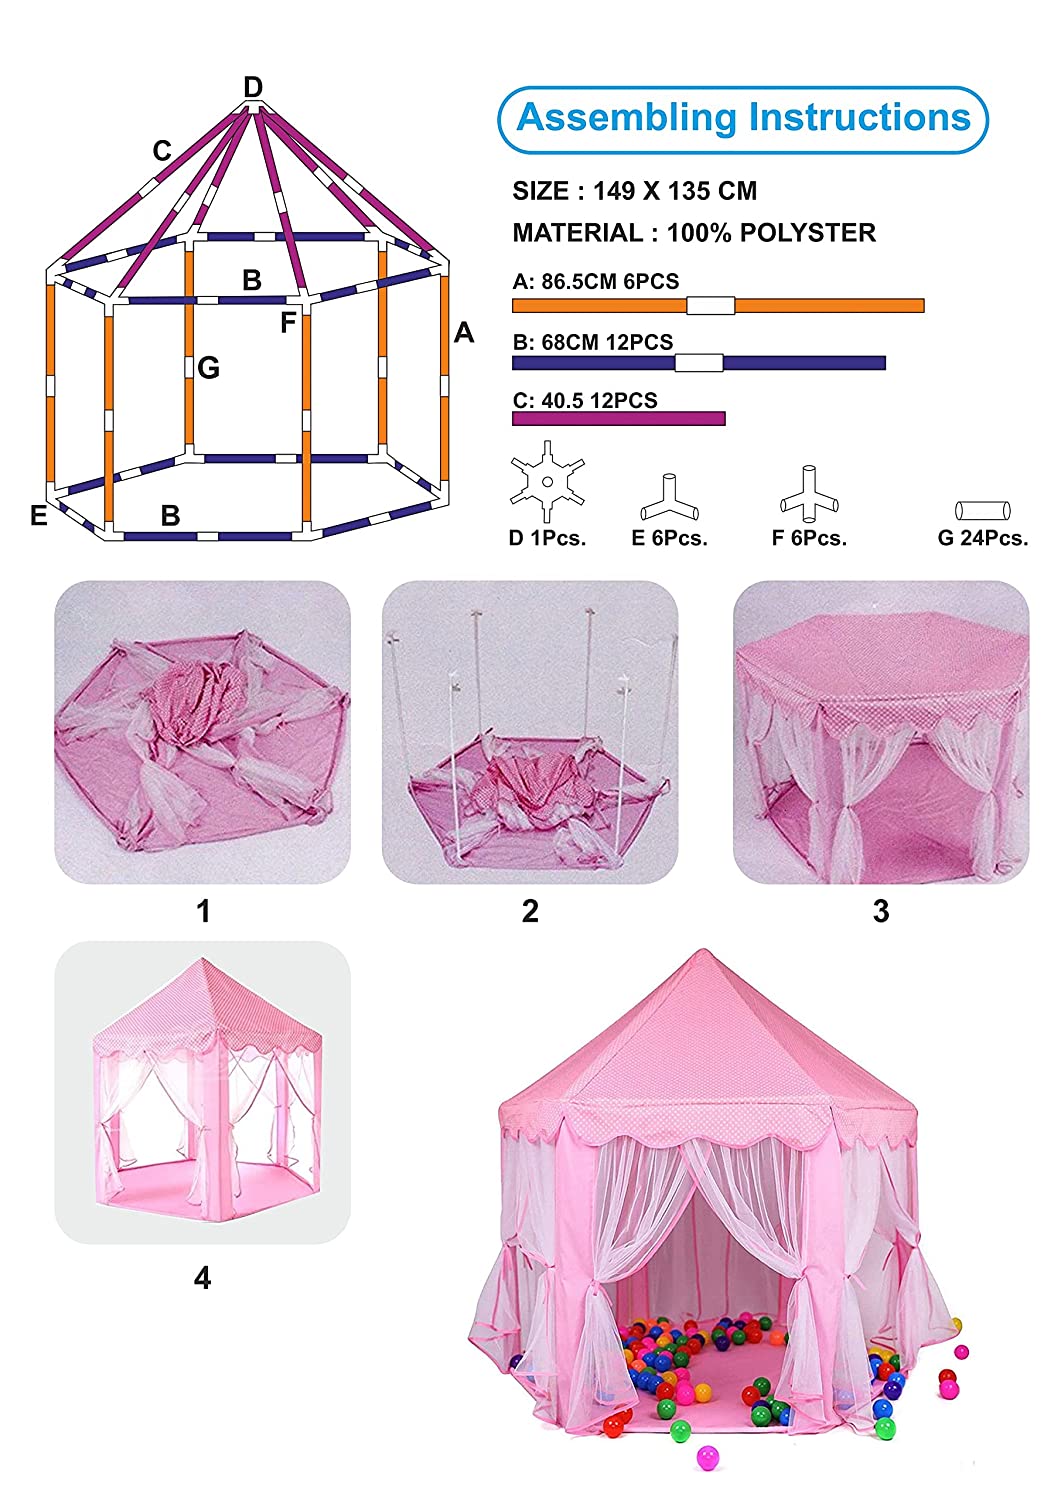 Webby Kids Indoor and Outdoor Castle Play Tent House (Pink)